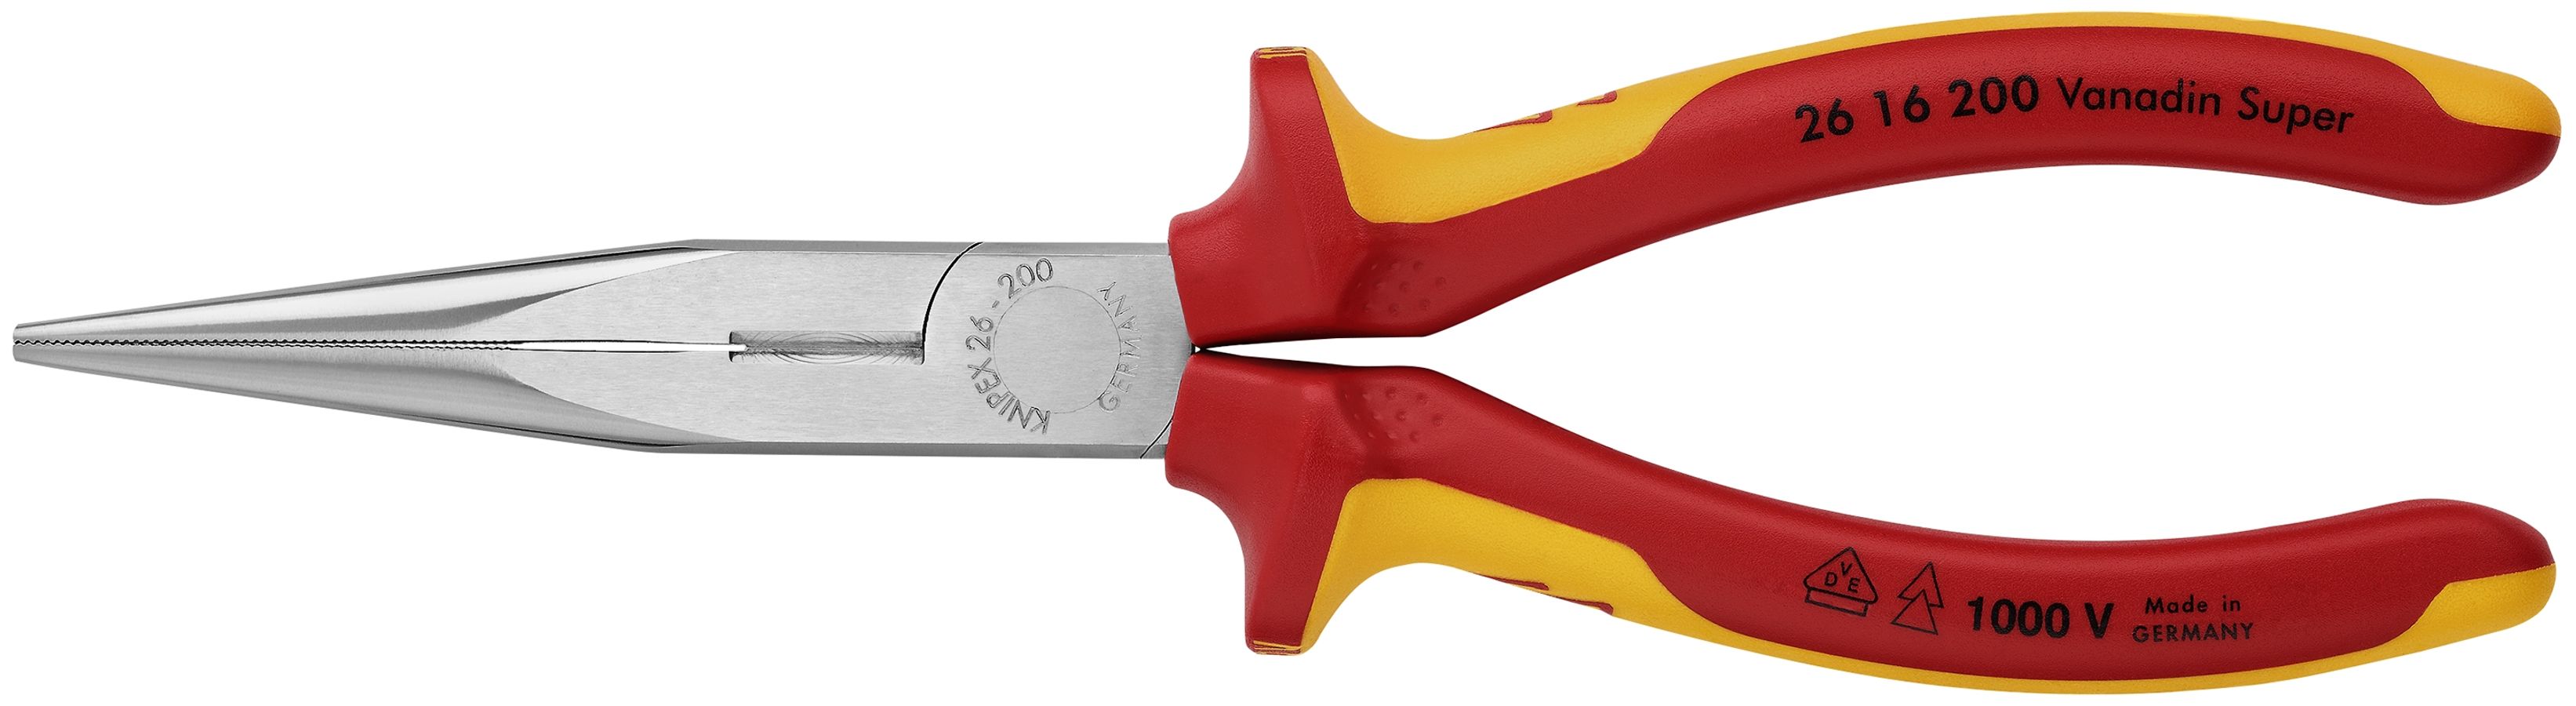 Long Nose Pliers with Cutter-1000V Insulated | KNIPEX Tools